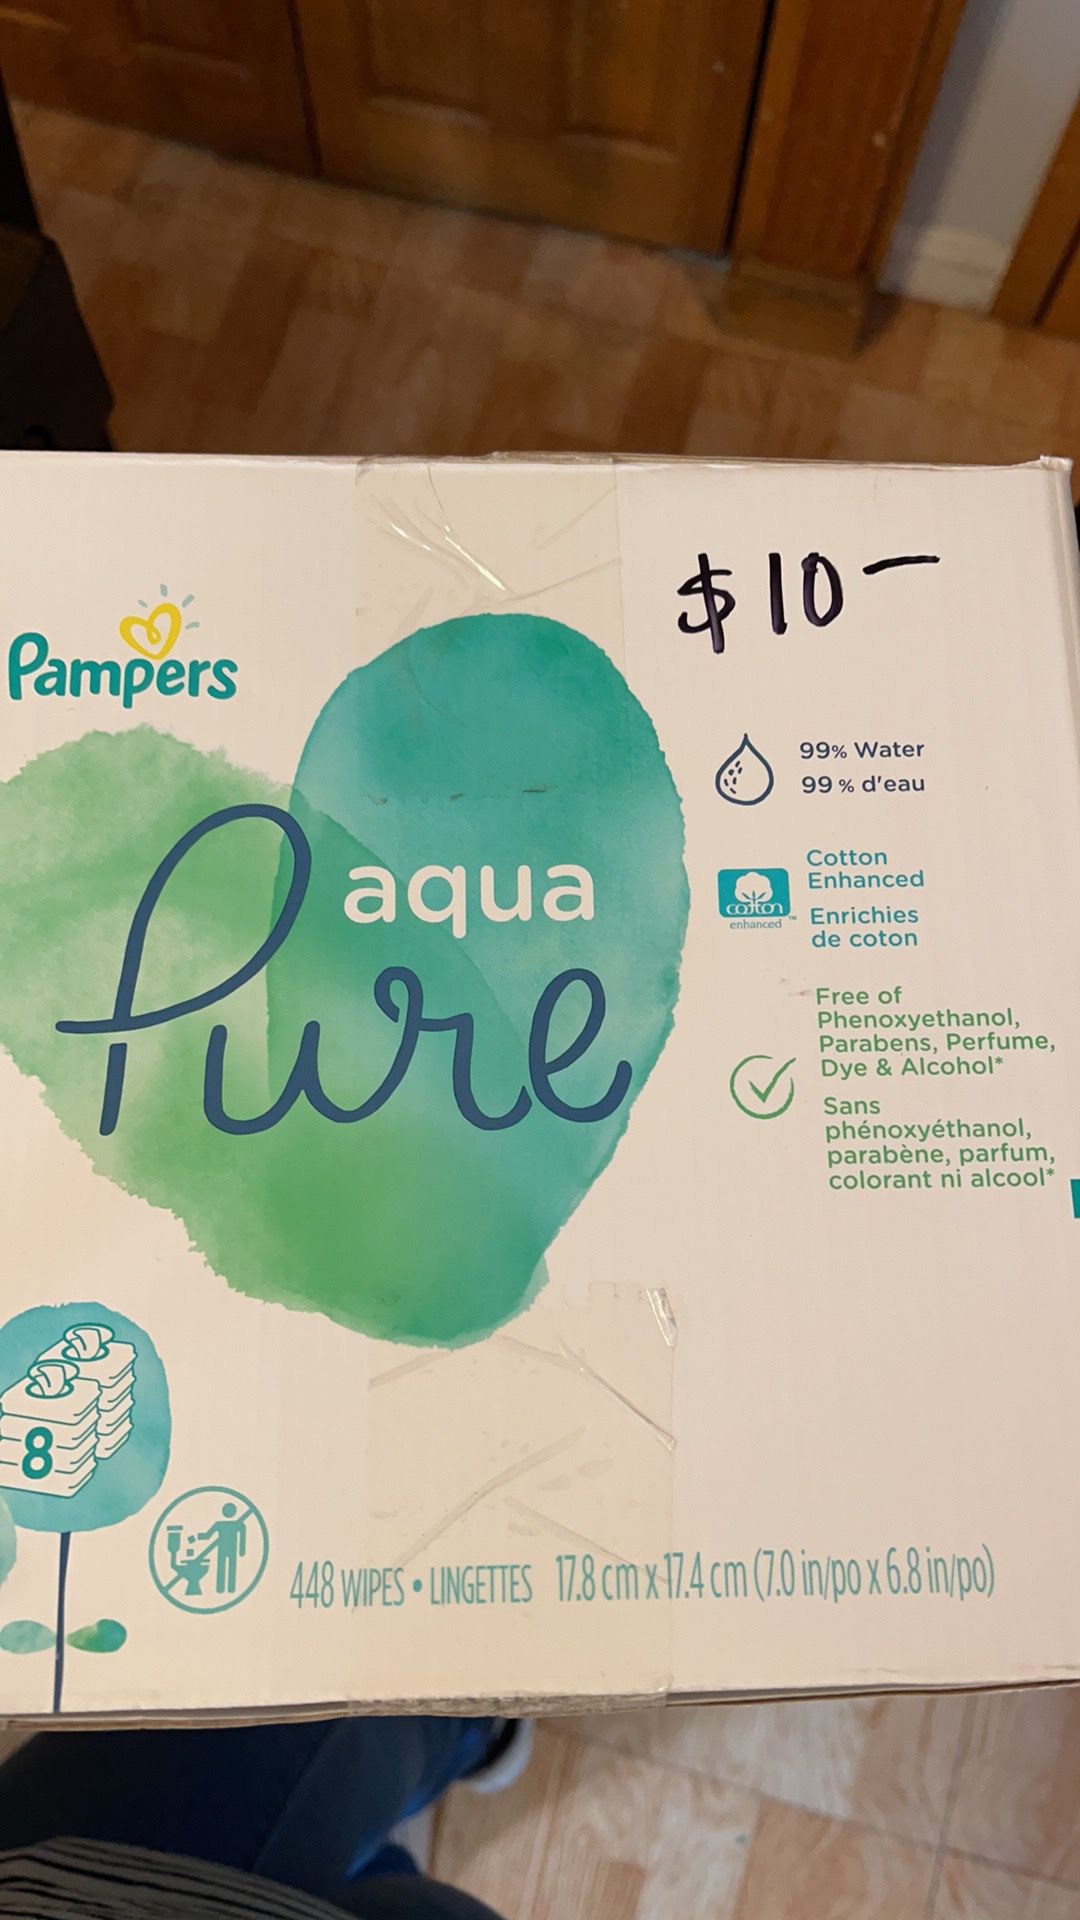 Pampers Baby Wipes 